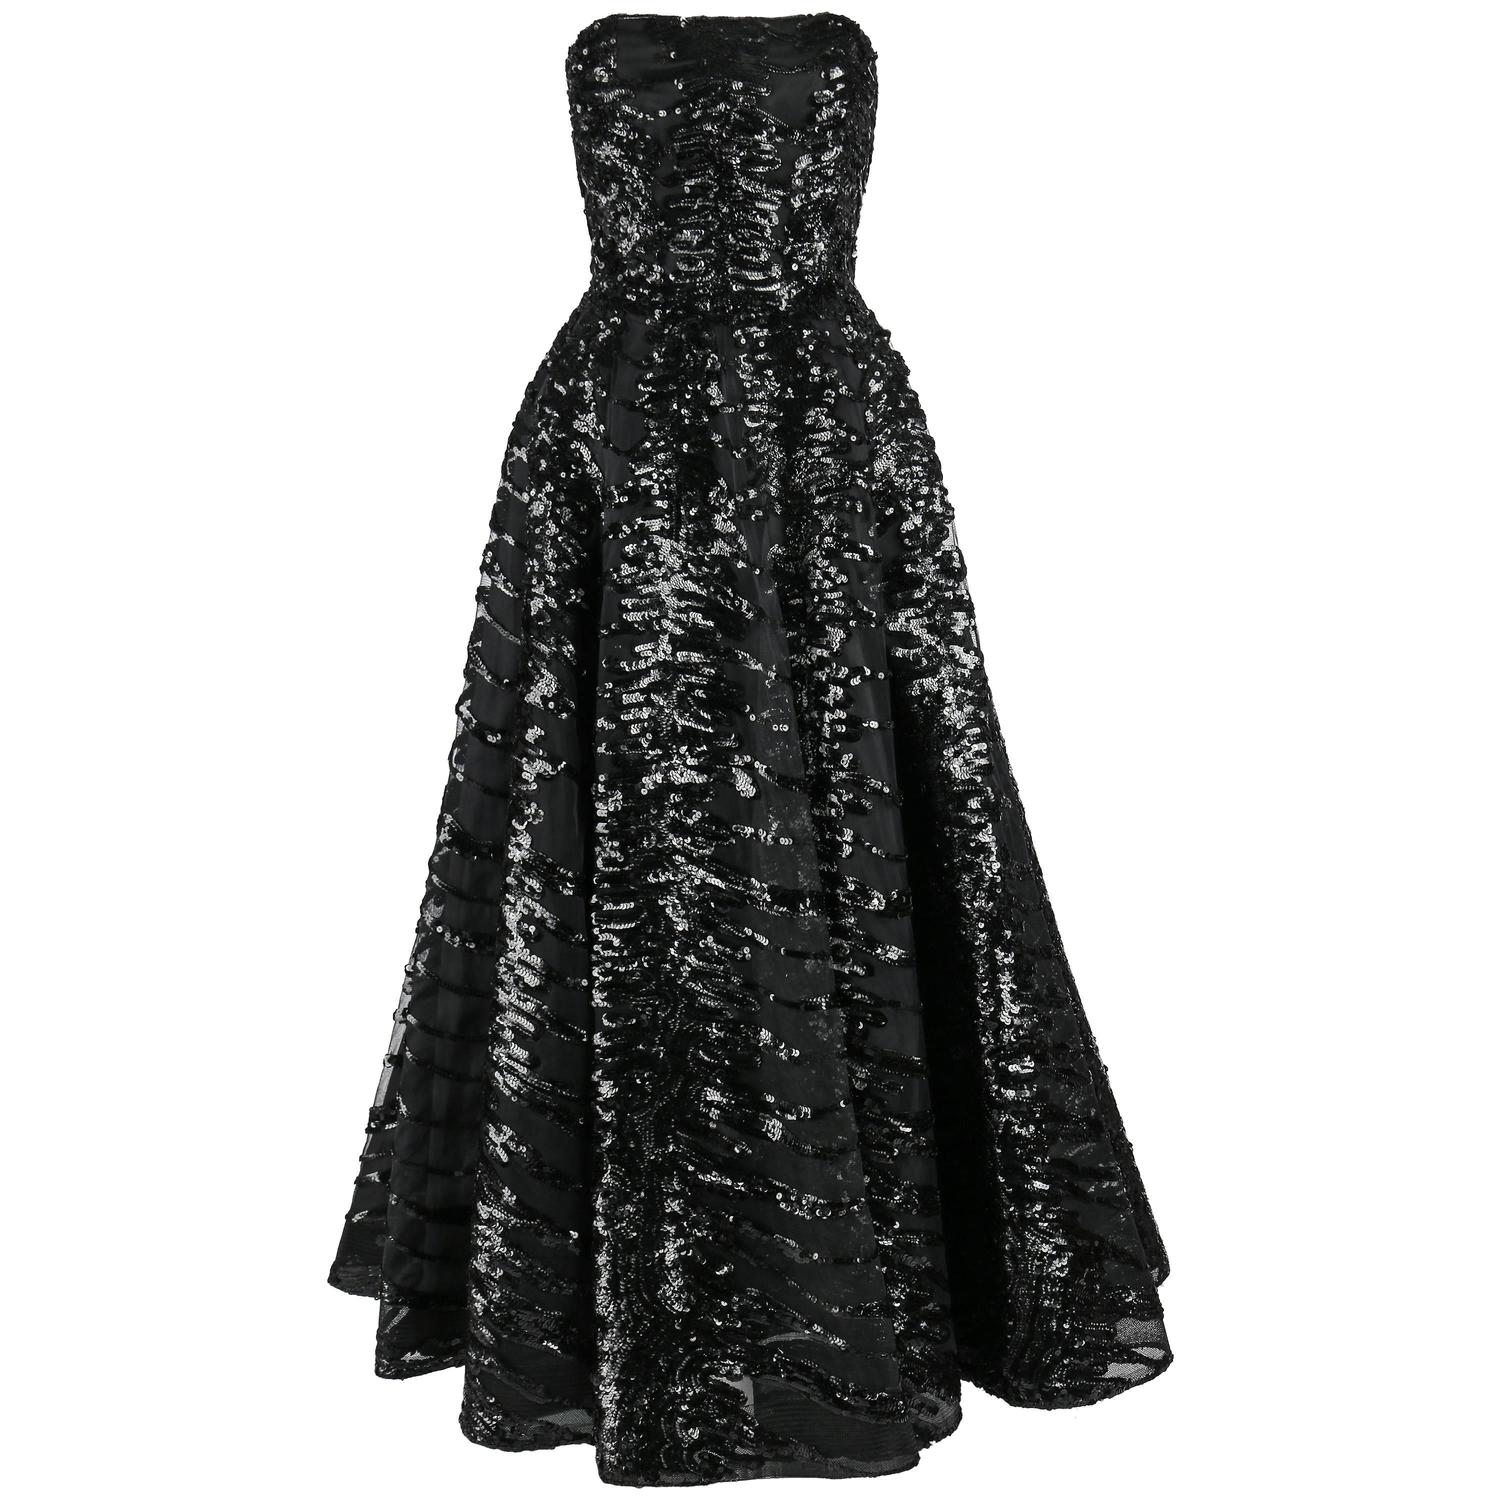 HAUTE COUTURE 1950s Black Sequin Ball Gown Evening Theater Opera Party ...